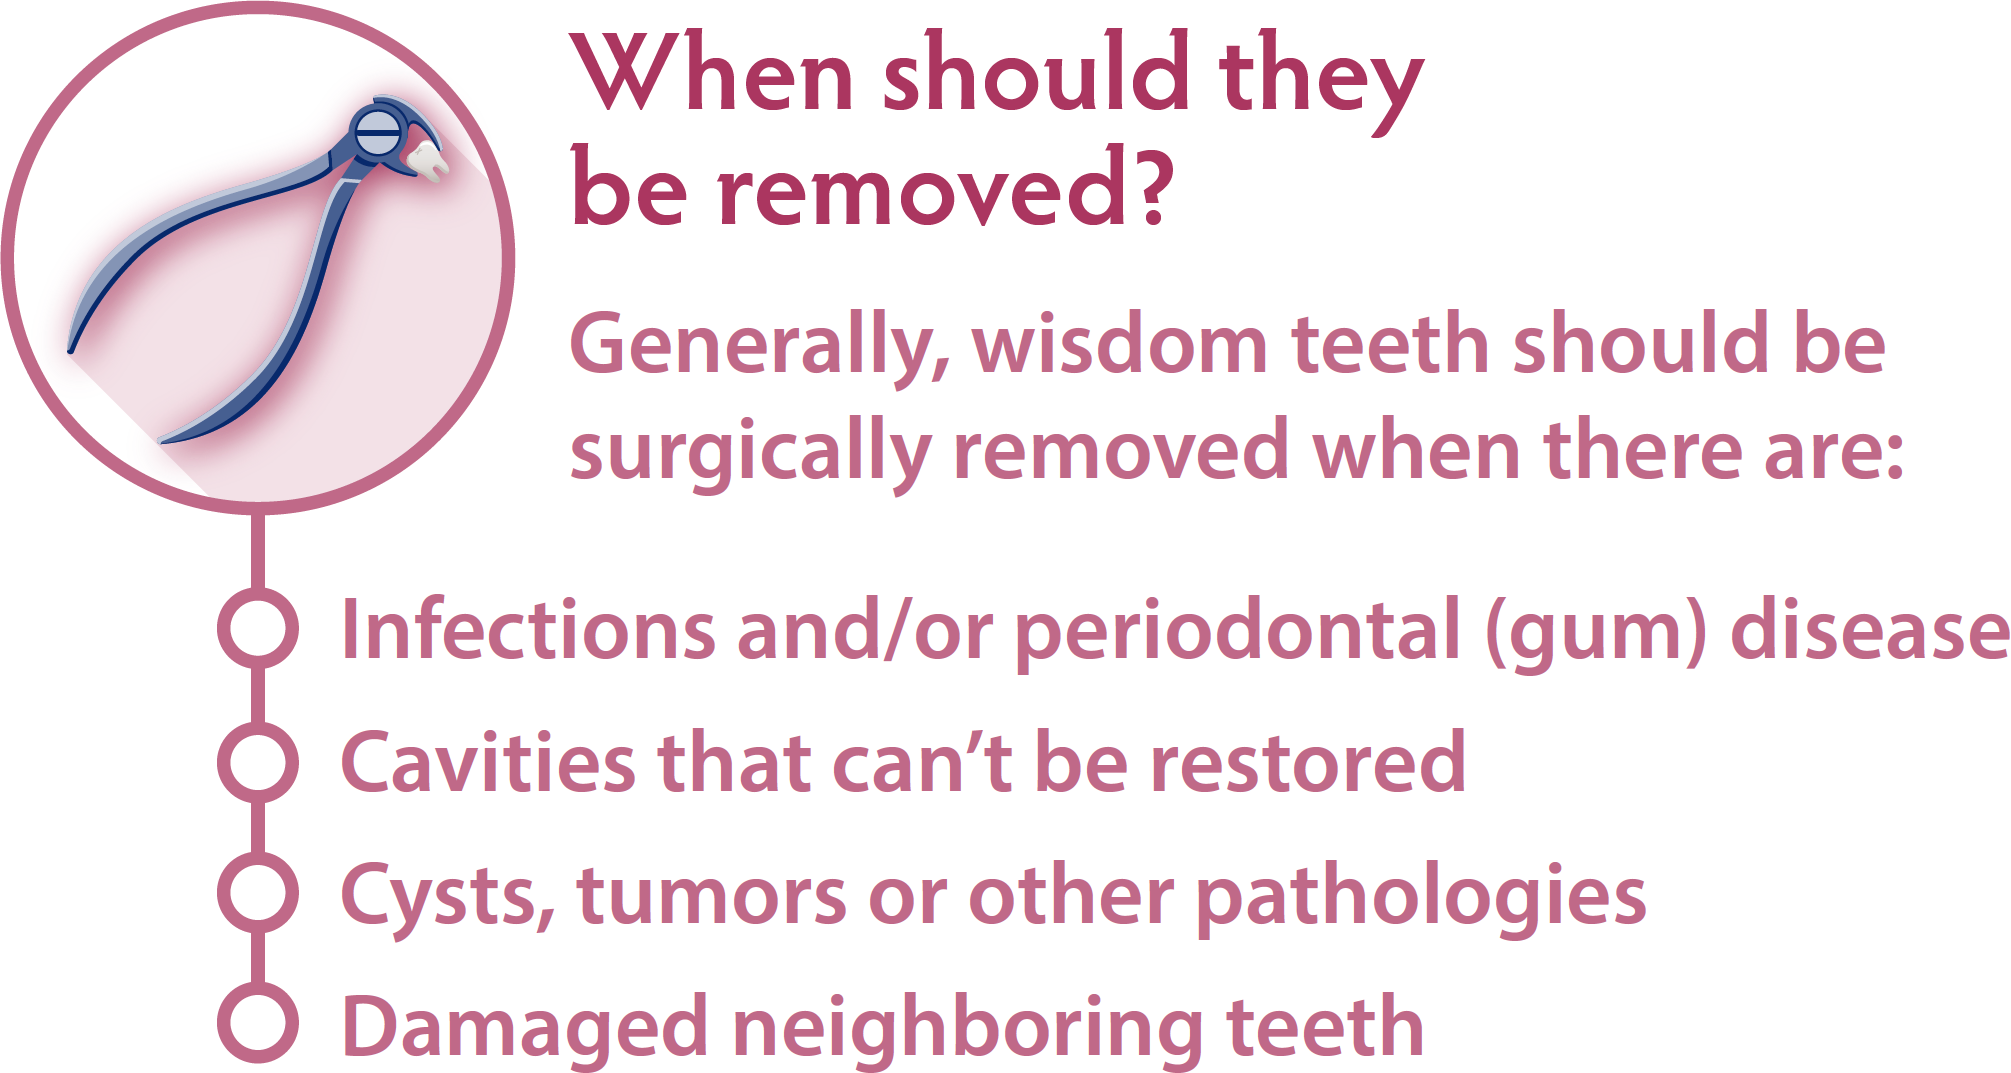 When should wisdom teeth be removed